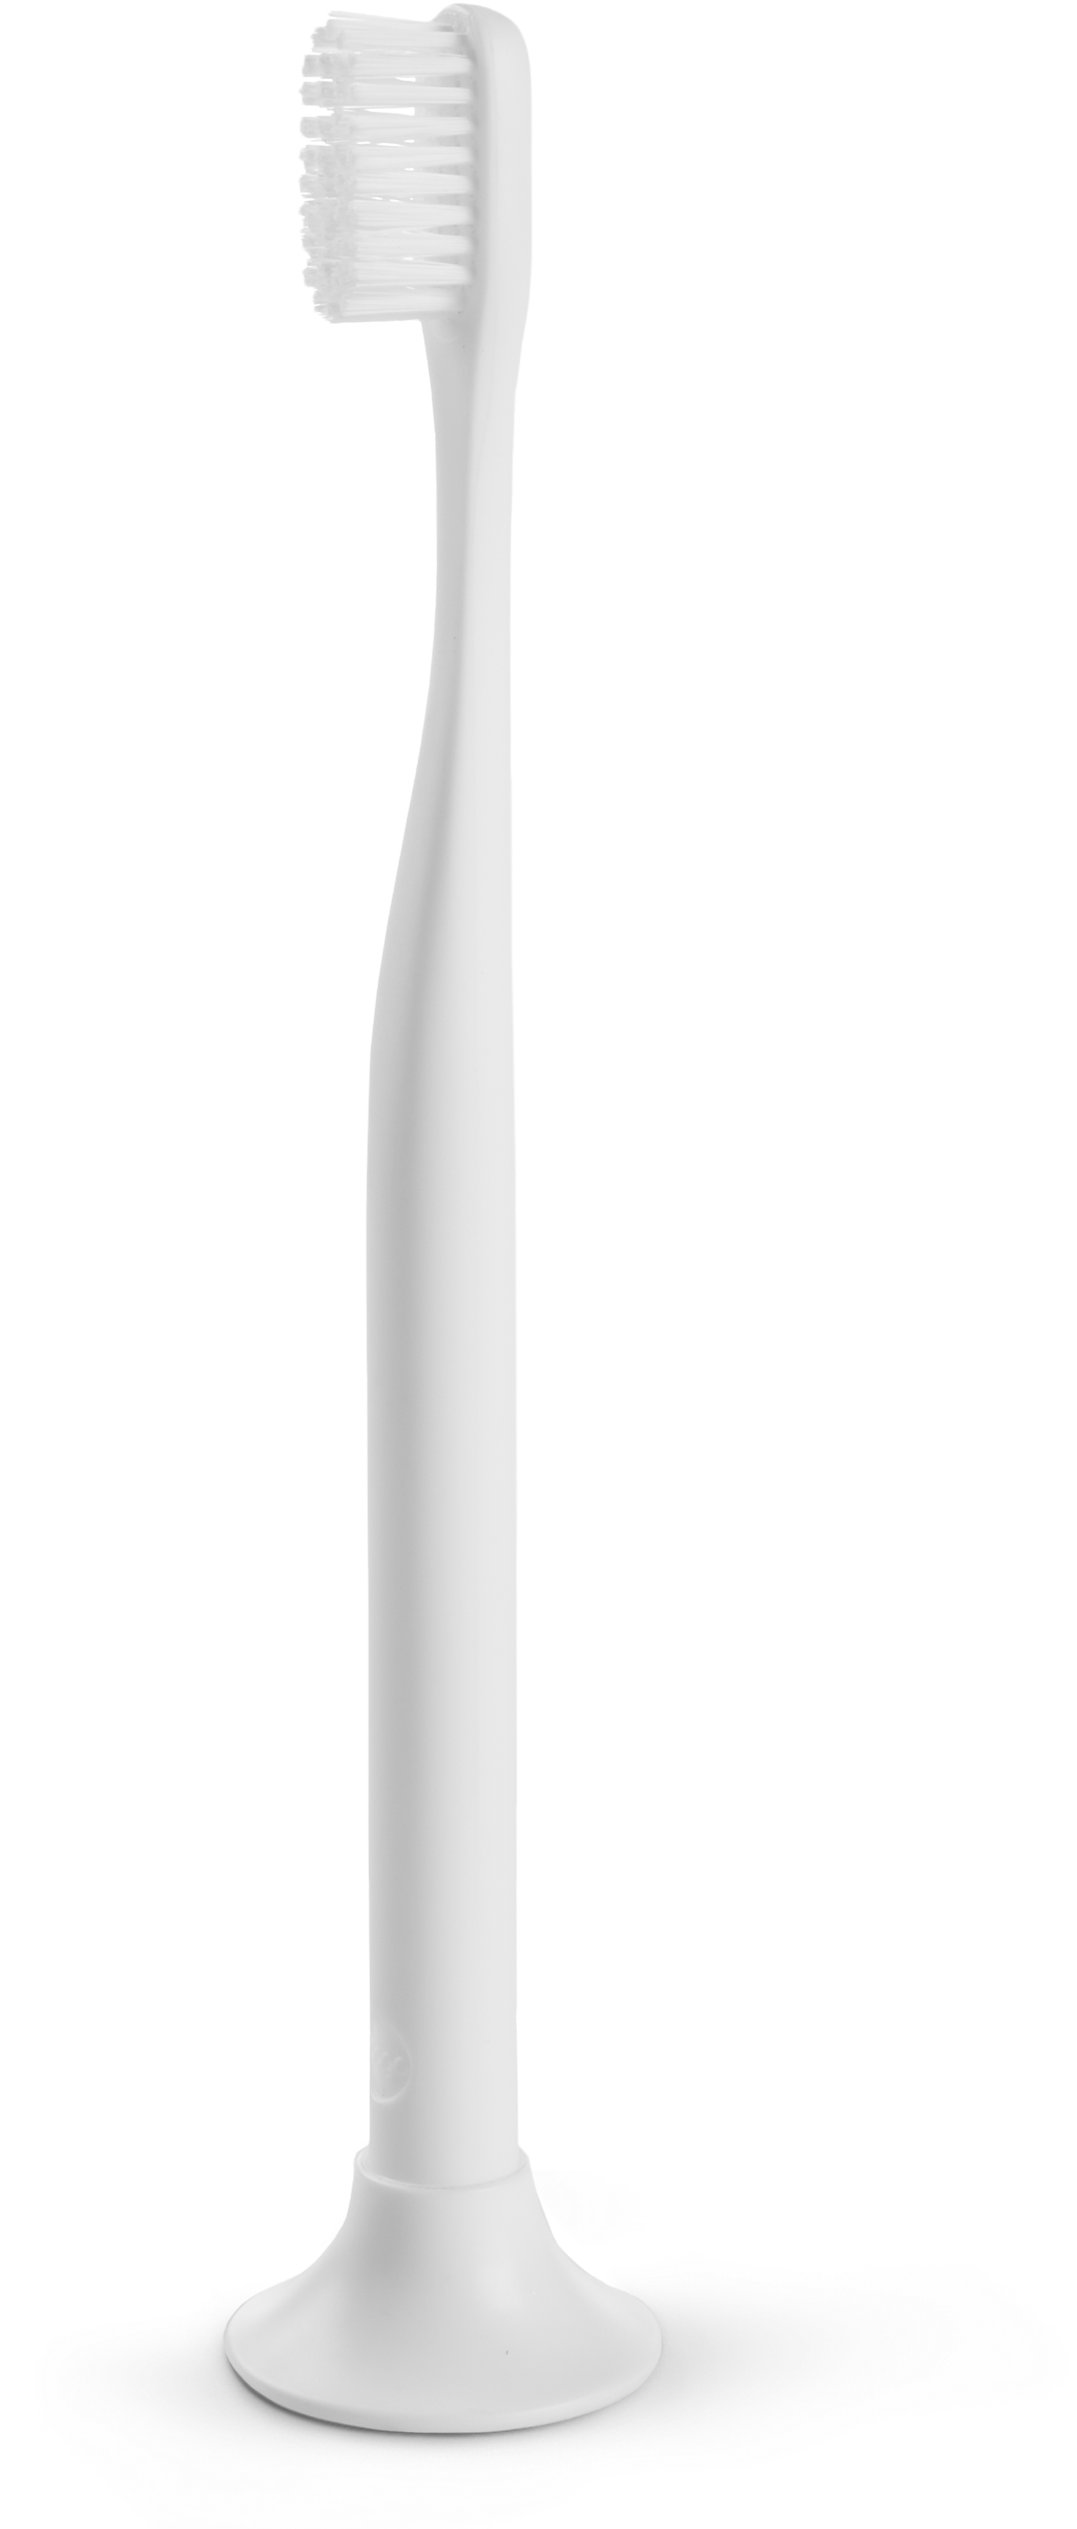 A White Toothbrush On A Black Background